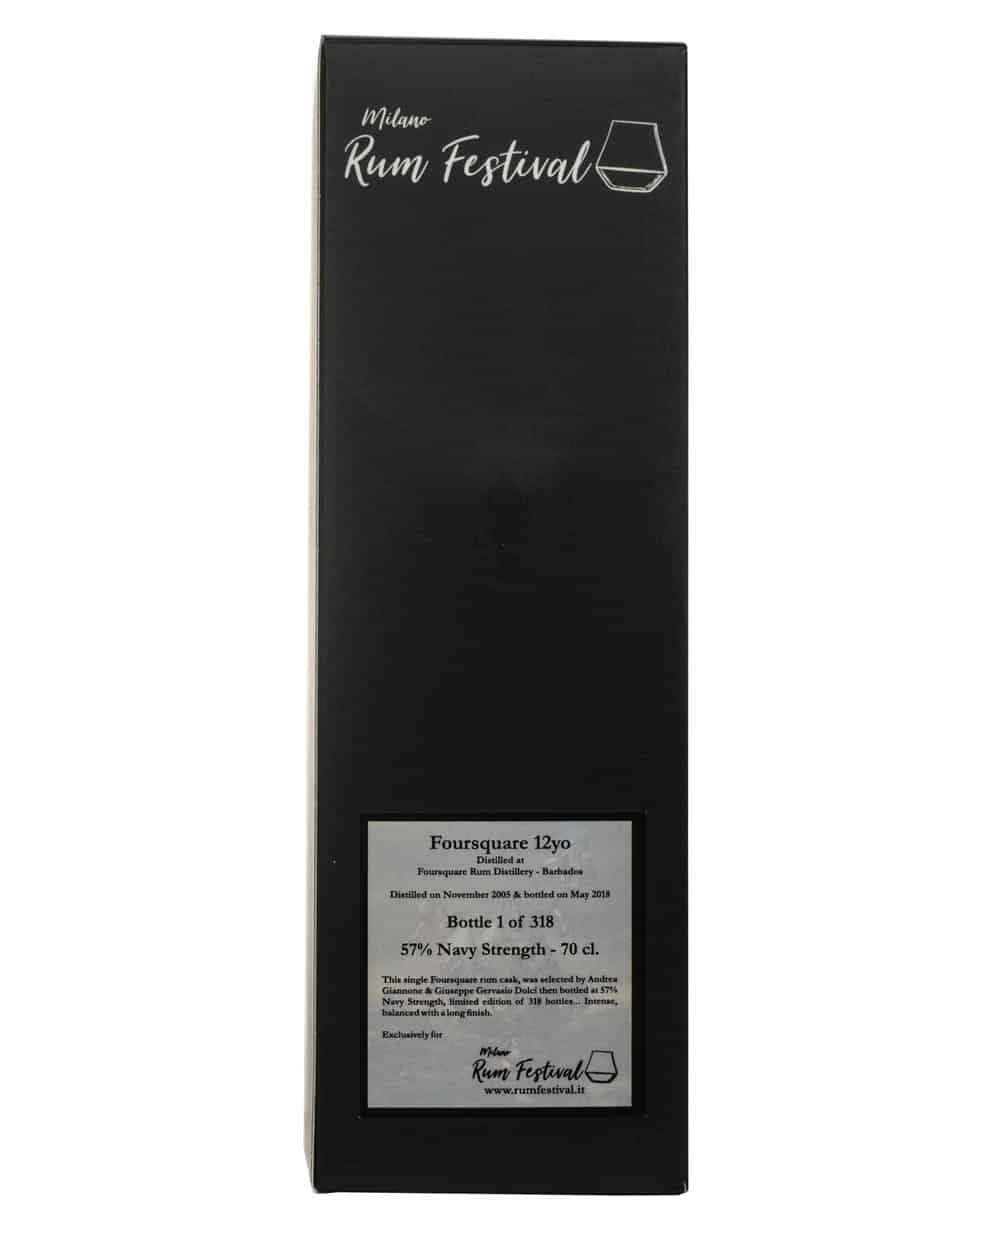 Foursquare 12 Years Old Milano Rum Festival 2005 Box Back Must Have Malts MHM